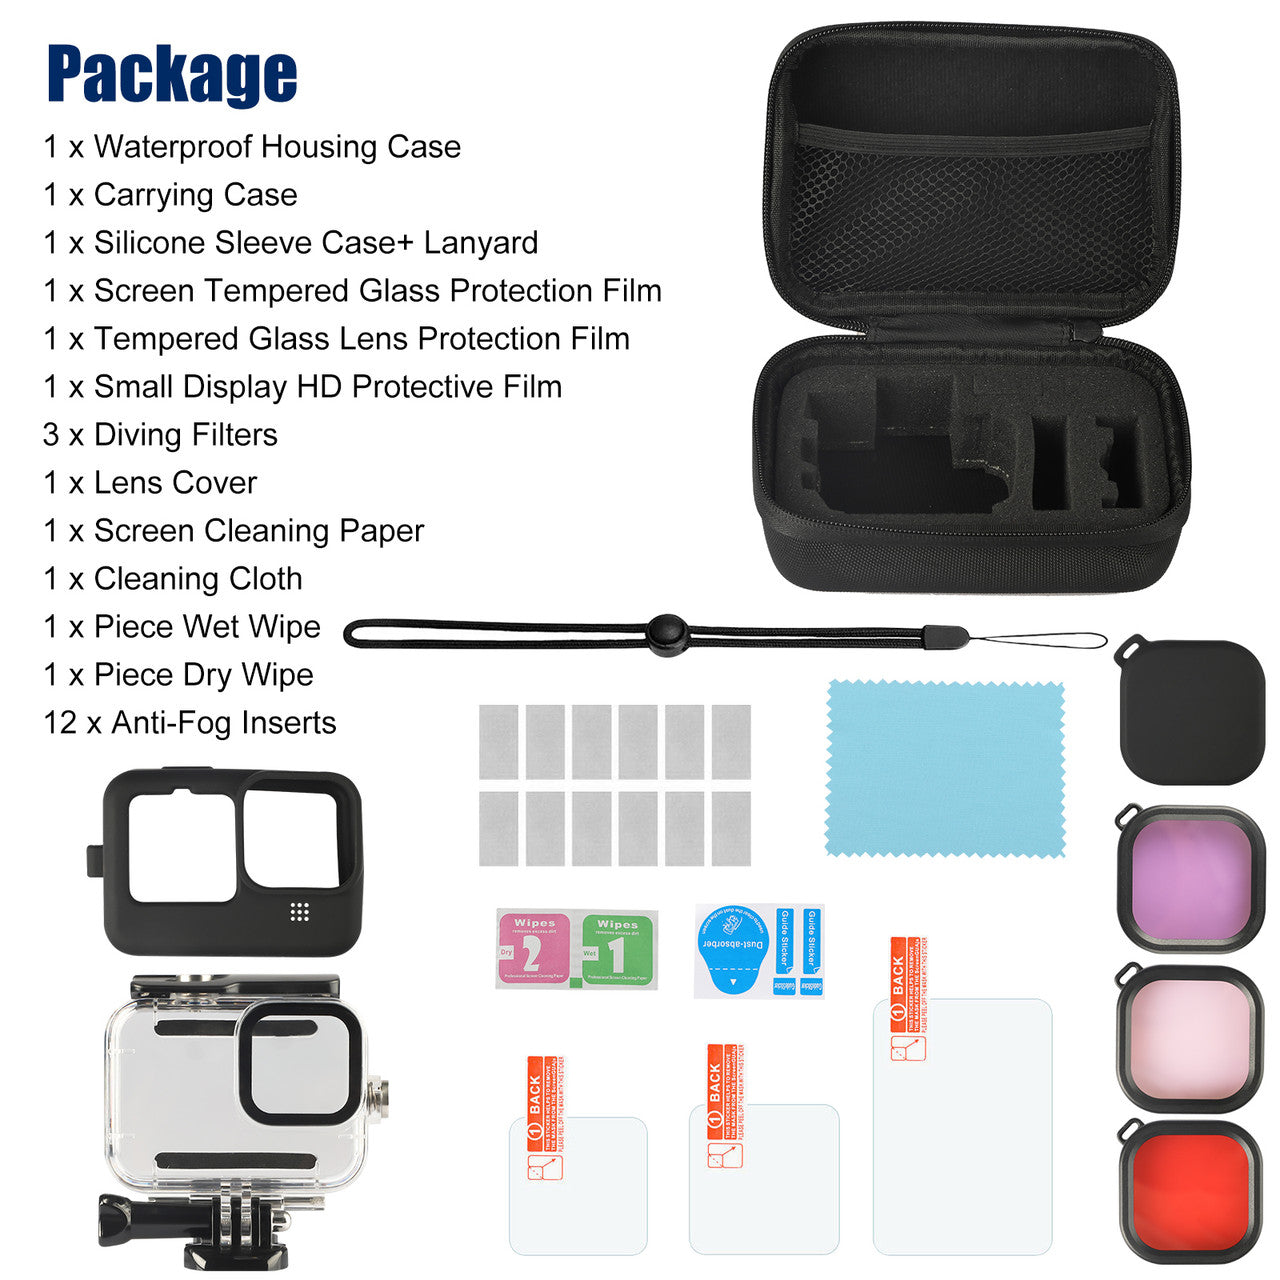 Accessories Kit for GoPro Hero 9 with Shockproof Carrying Case + Waterproof Case + Tempered Glass Screen & Lens Protector + Silicone Sleeve + Lanyard + Lens Filters + Anti-Fog Inserts